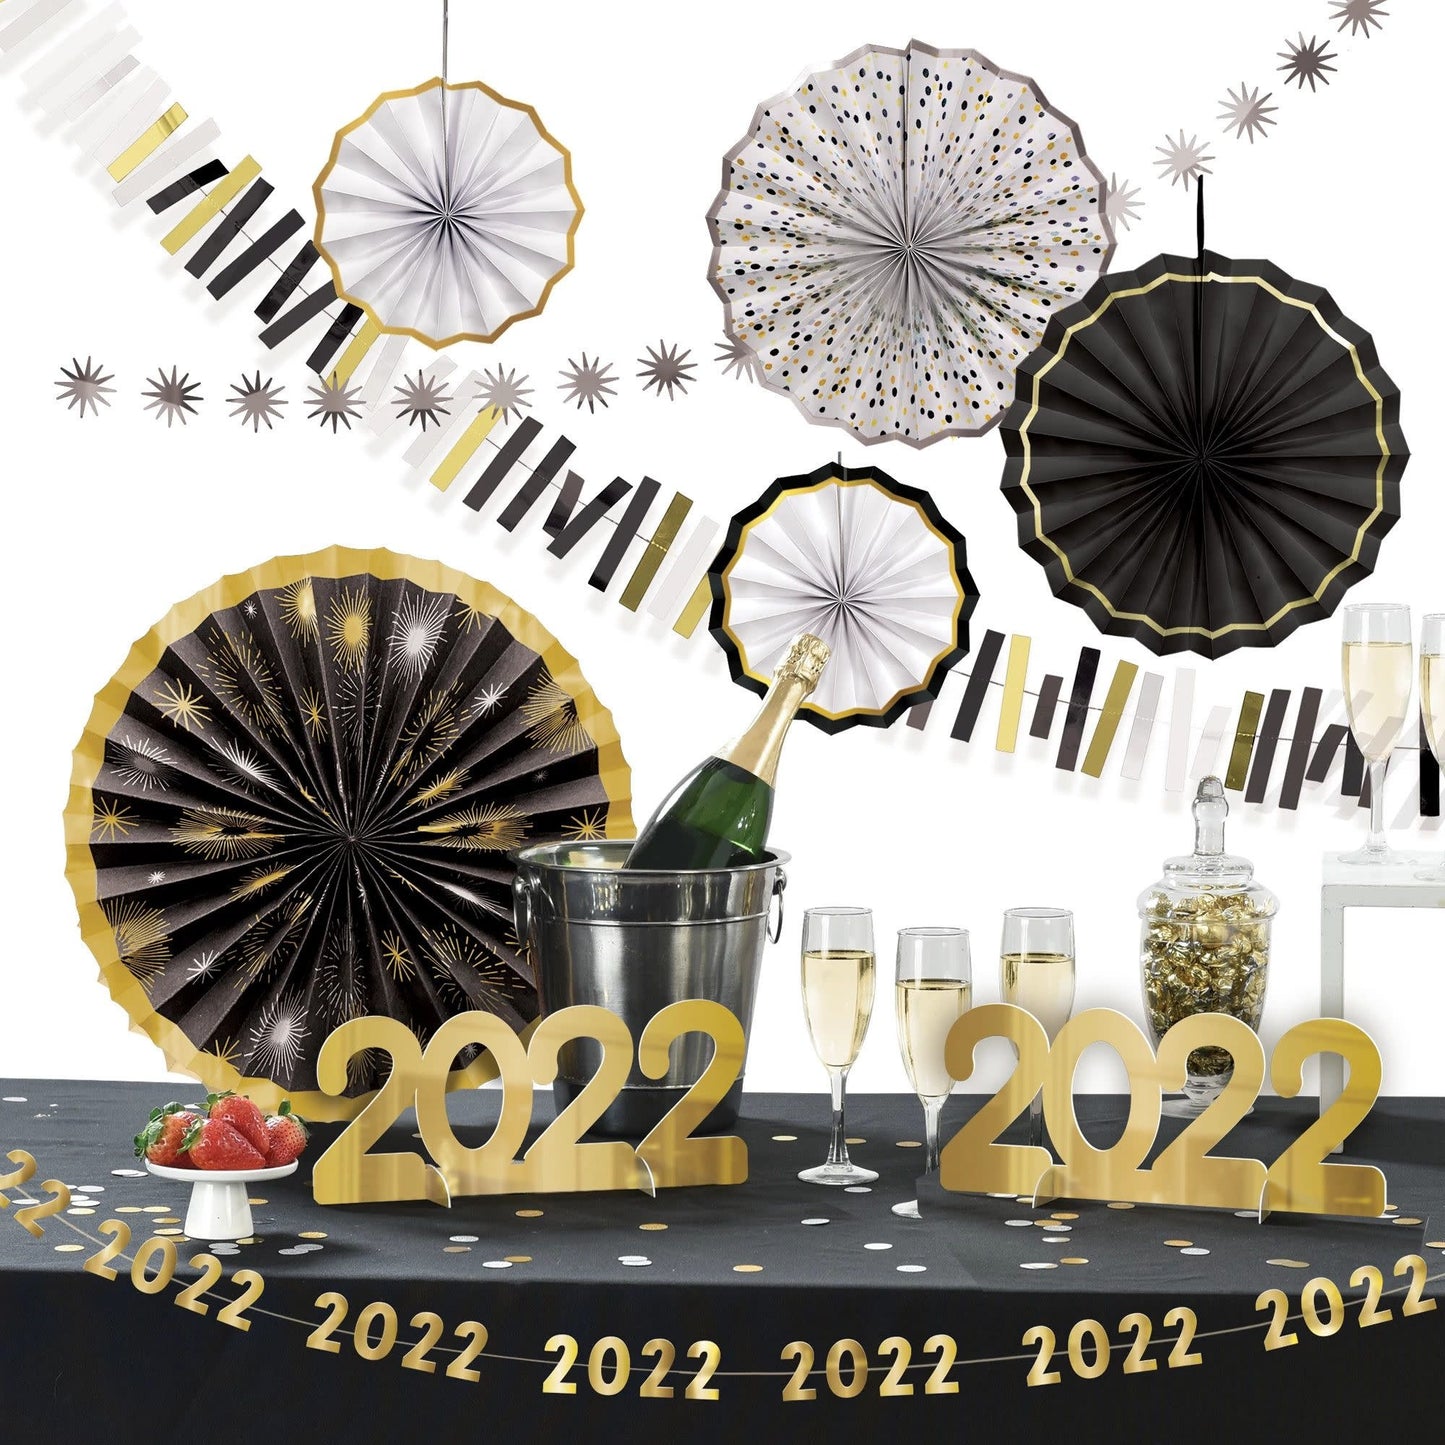 2022 New Year's Room Decorating Kit: Black/Silver/Gold (11pcs.)